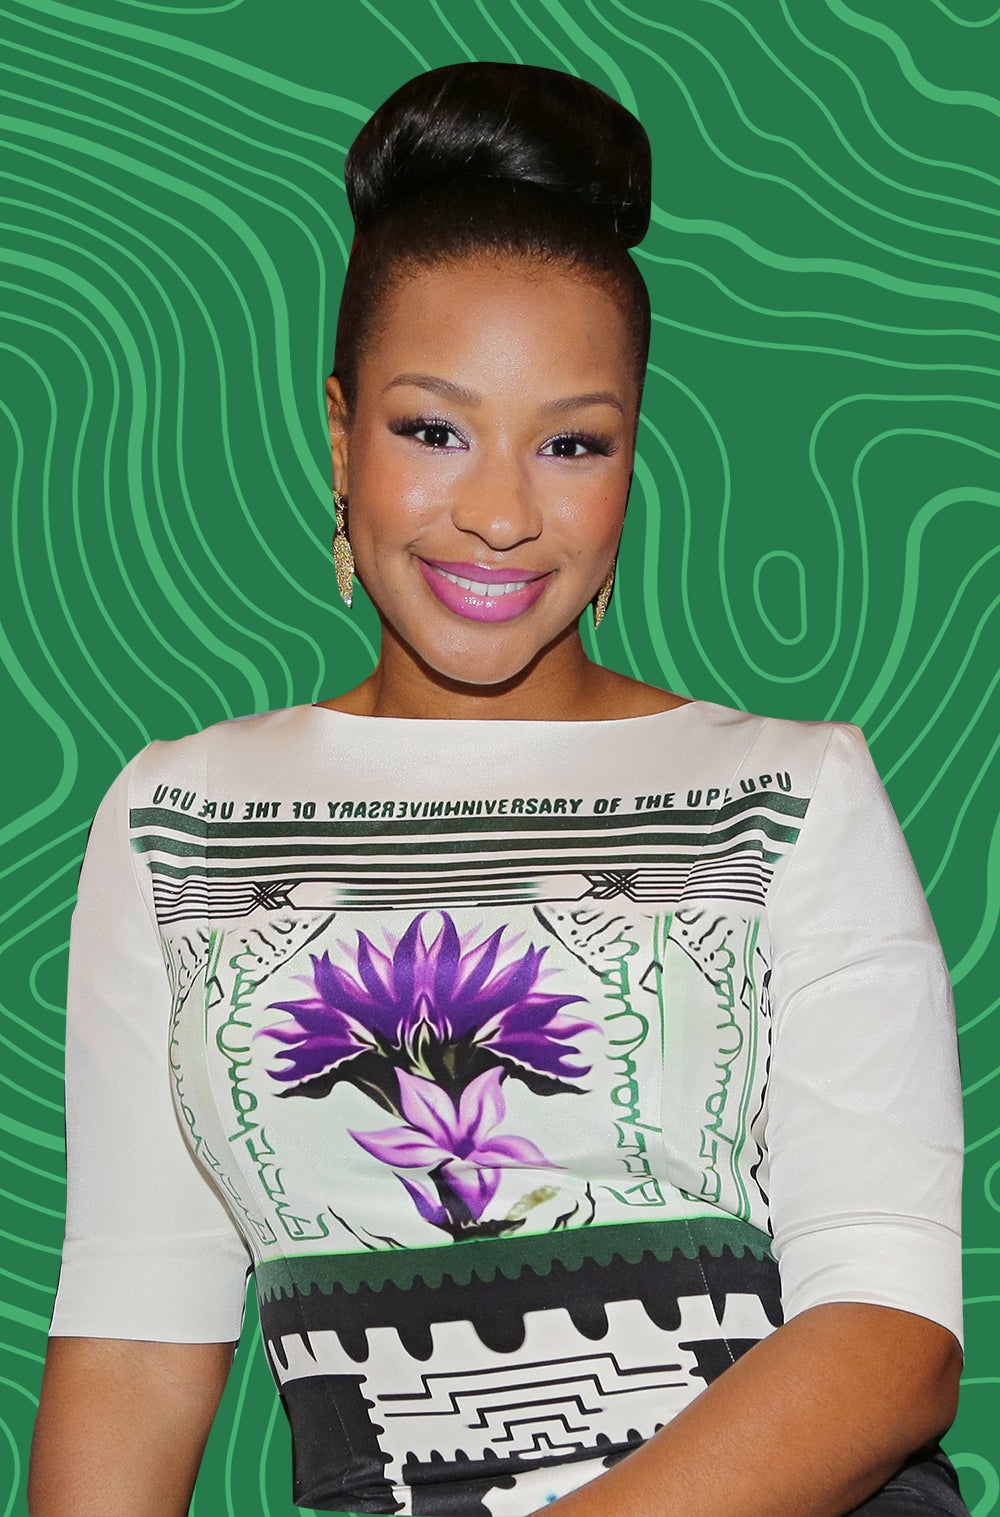 Savannah James On Married Life With LeBron, Why She’s So Private On Social Media and Her Incredible Year